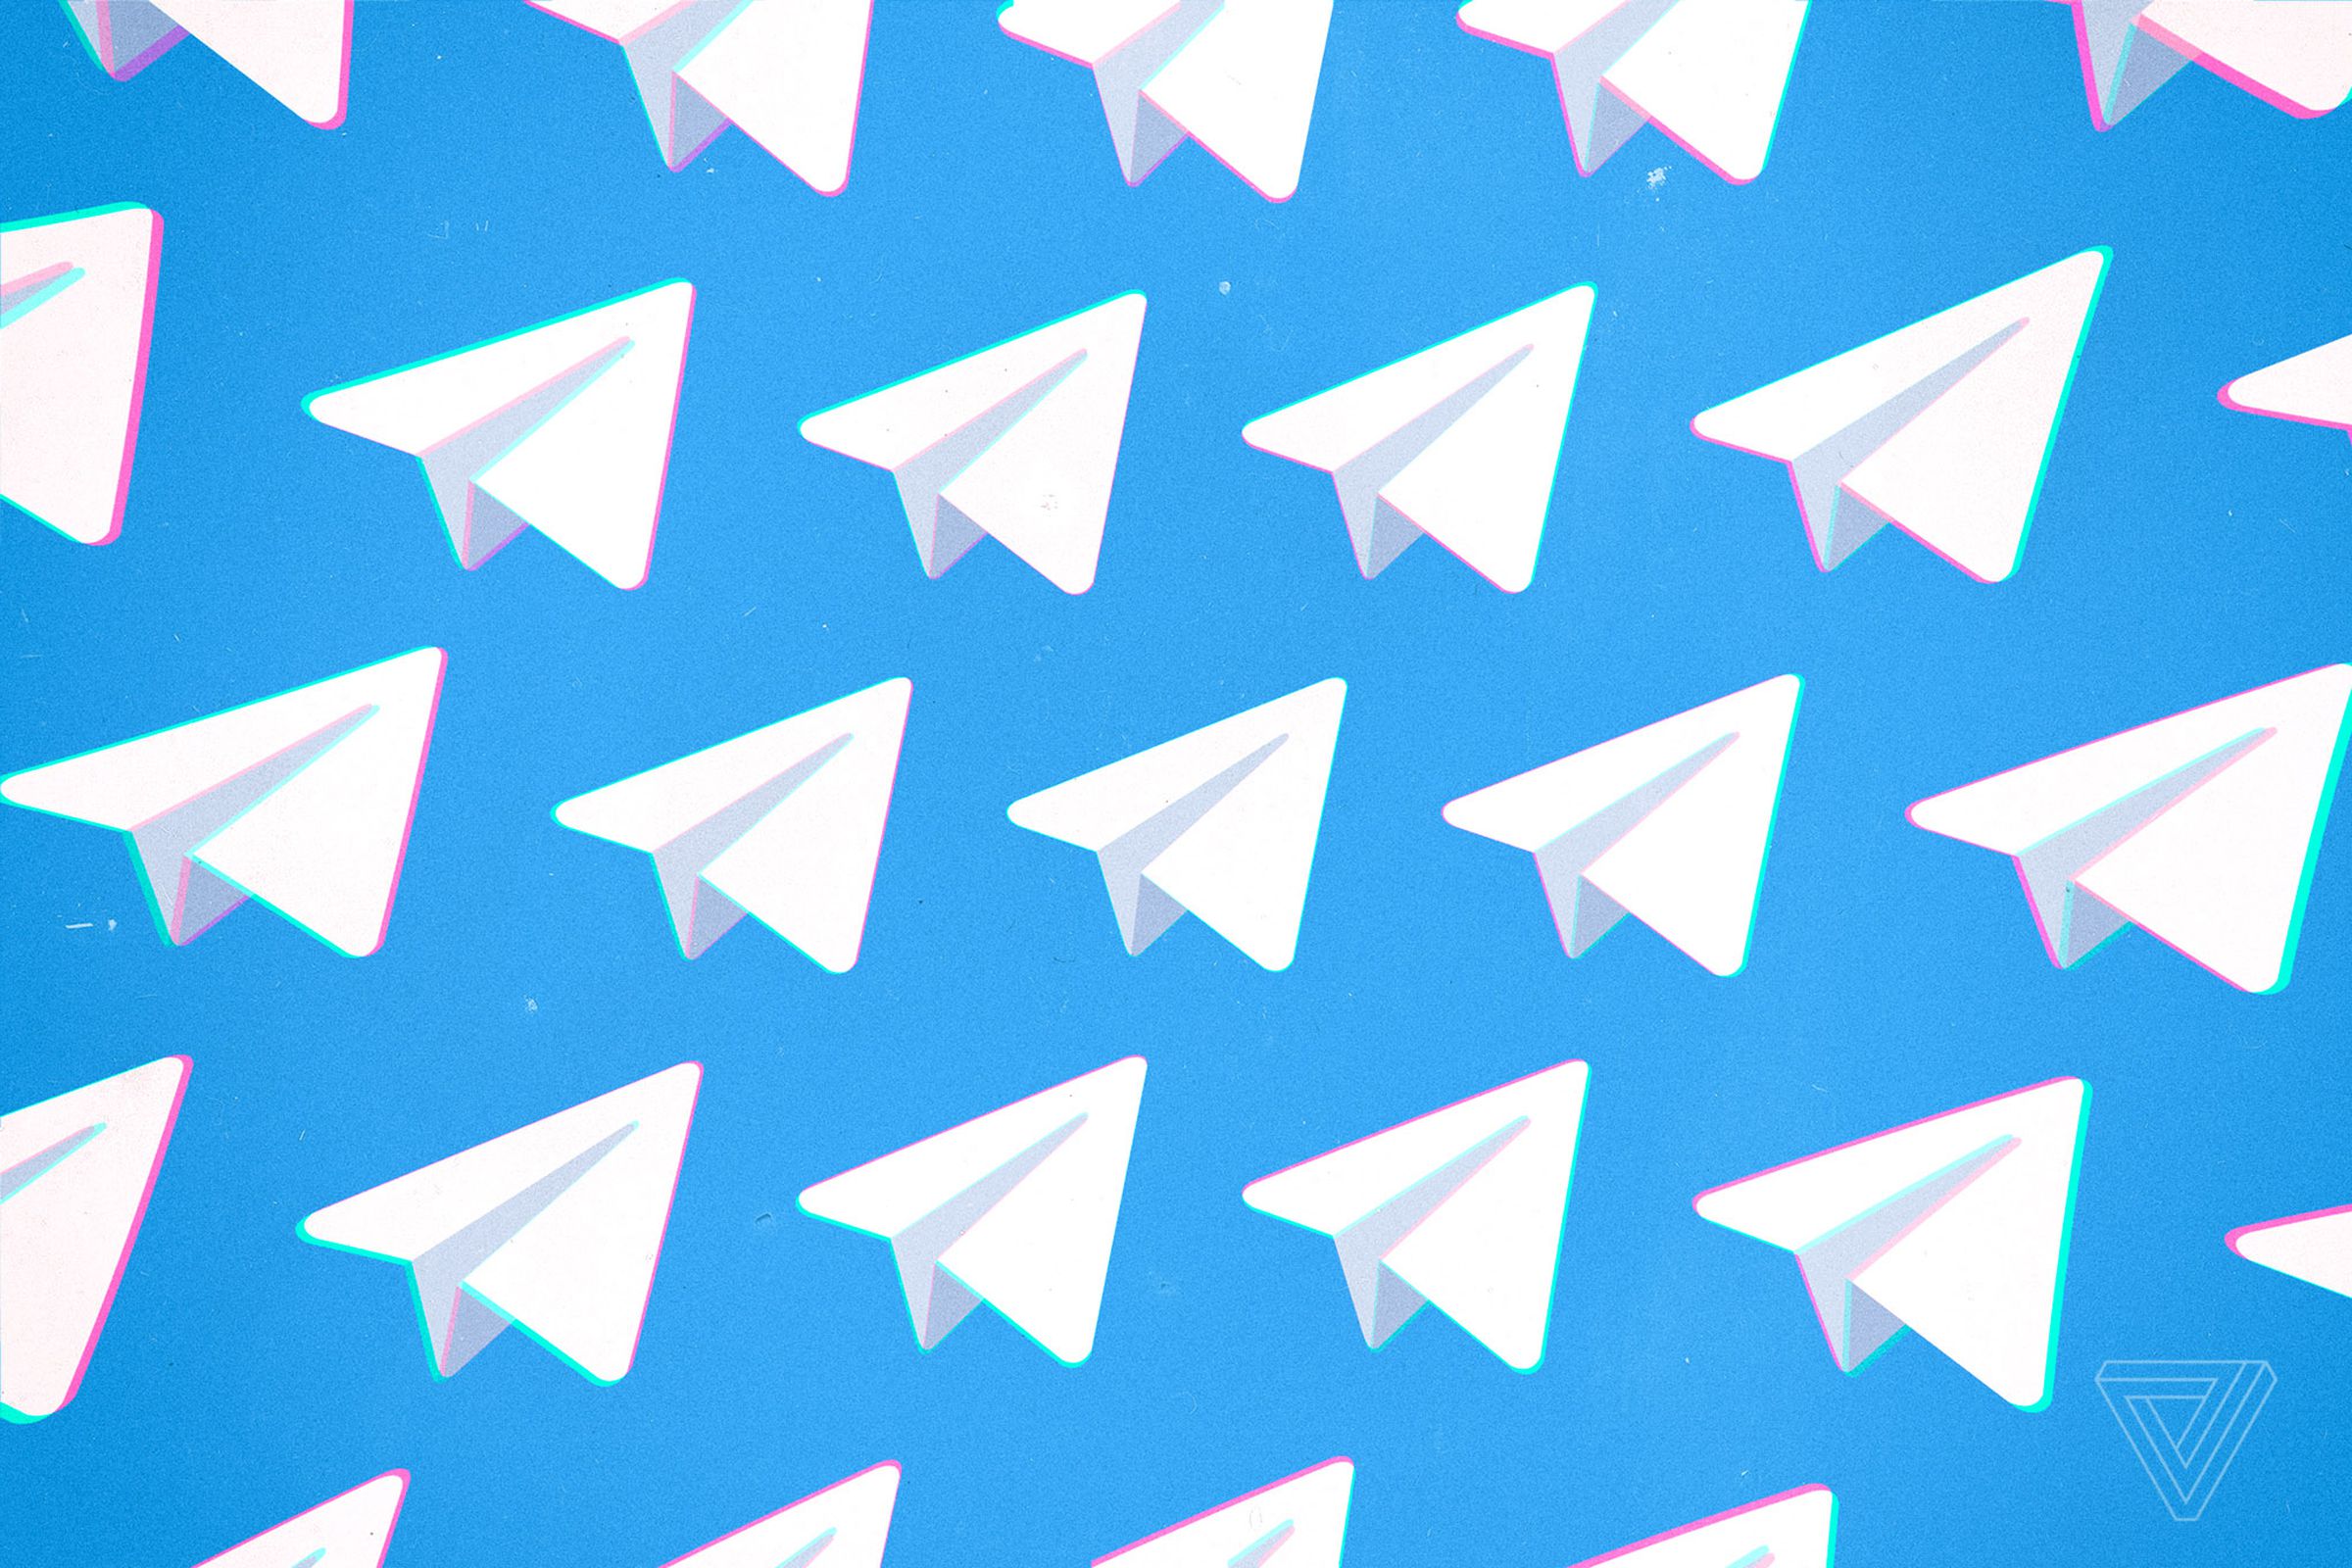 The Telegram logo repeated on a blue background.